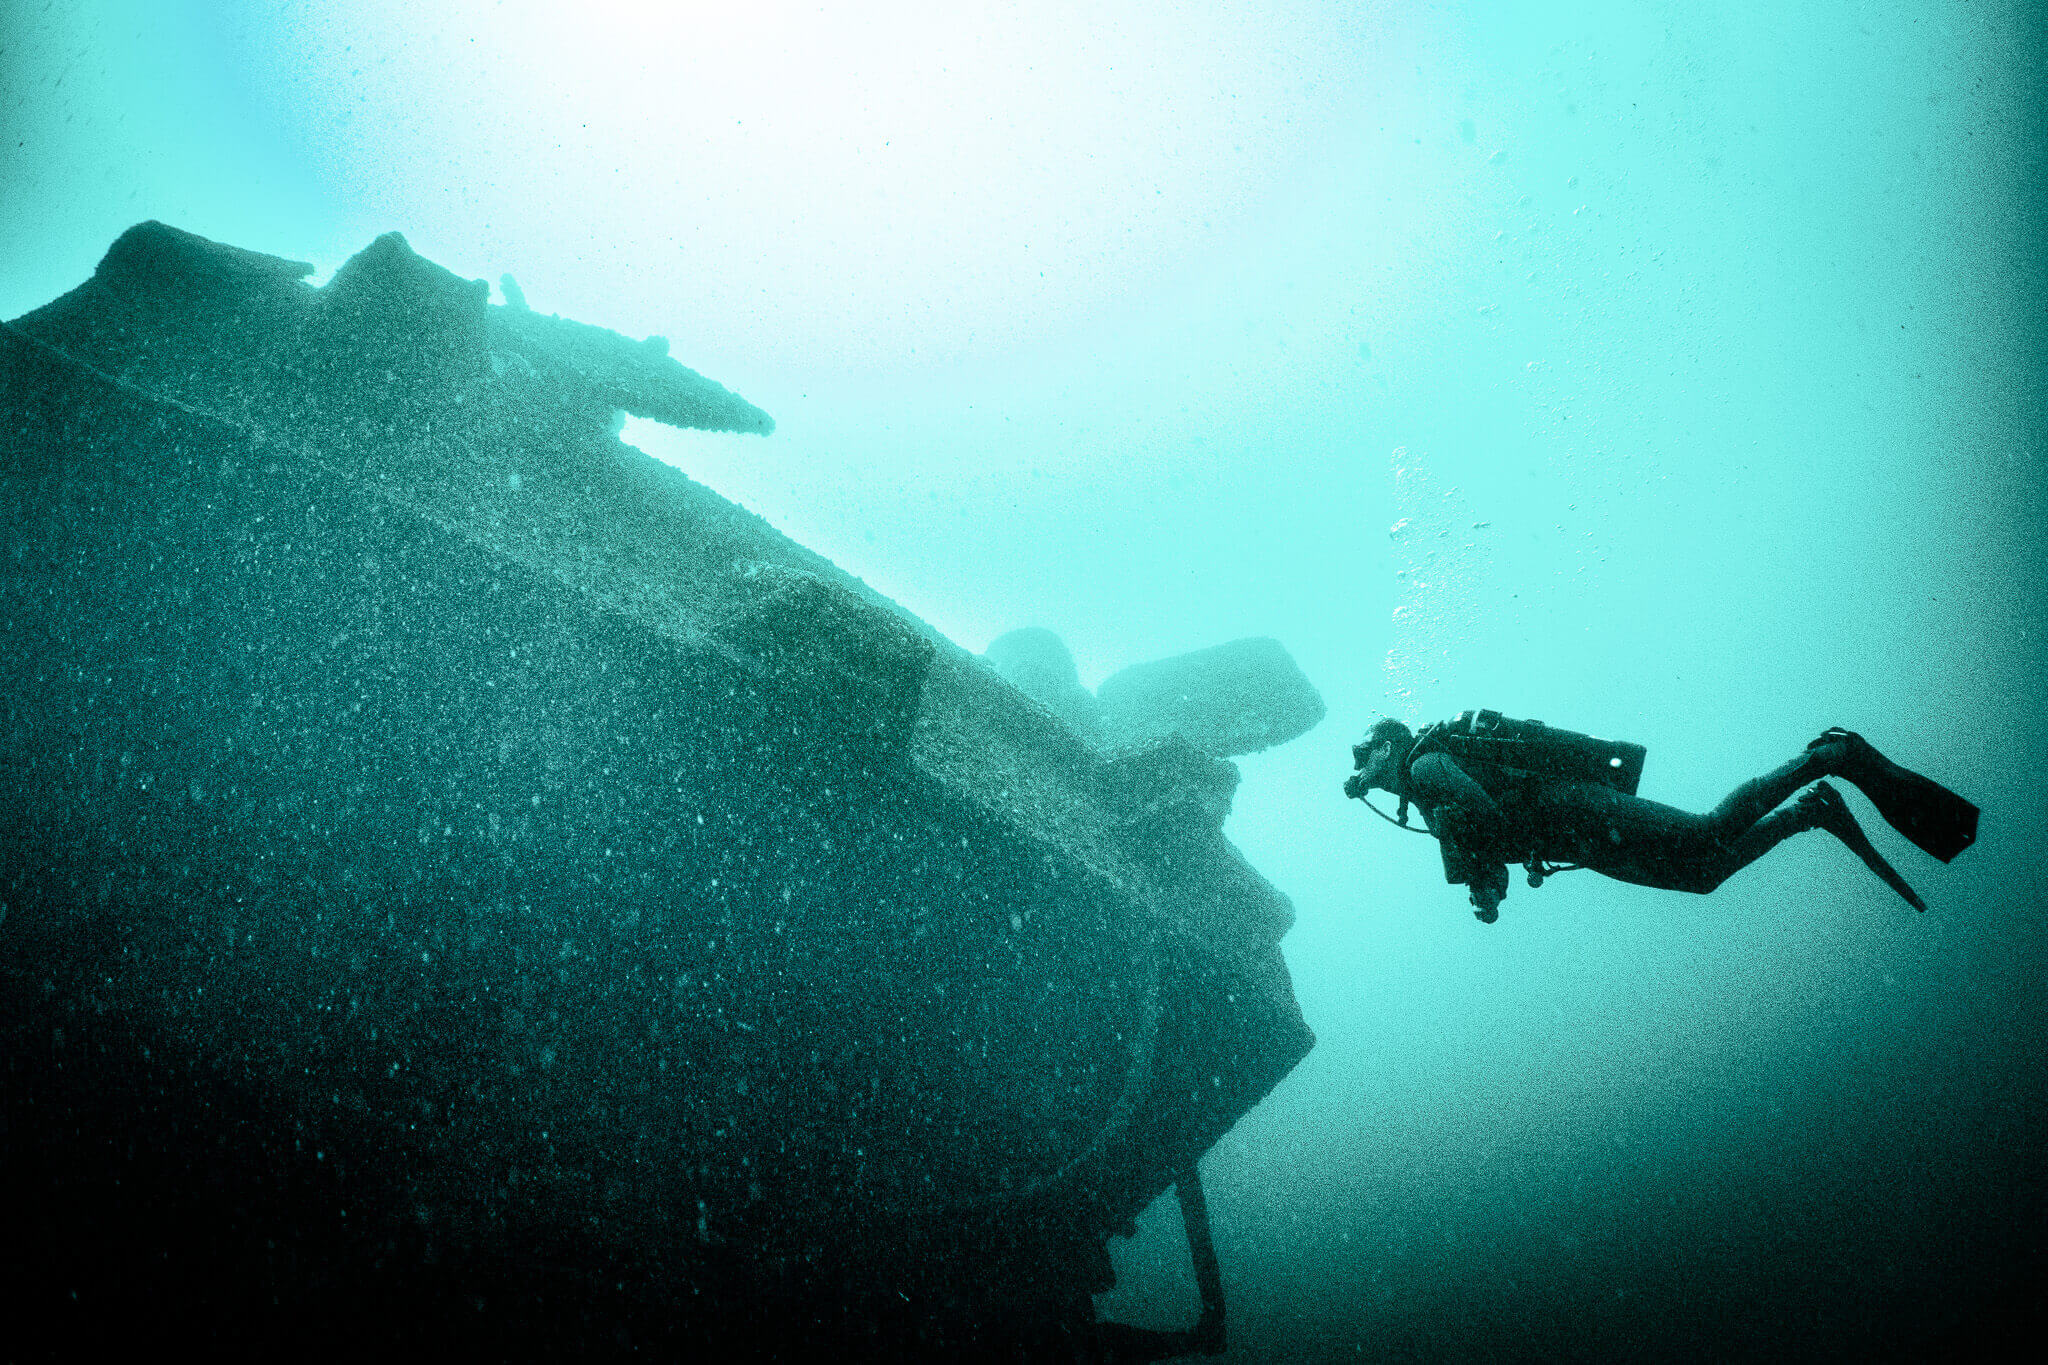 Underwater photo of a scuba diver examining the America shipwreck in the St. Lawrence River